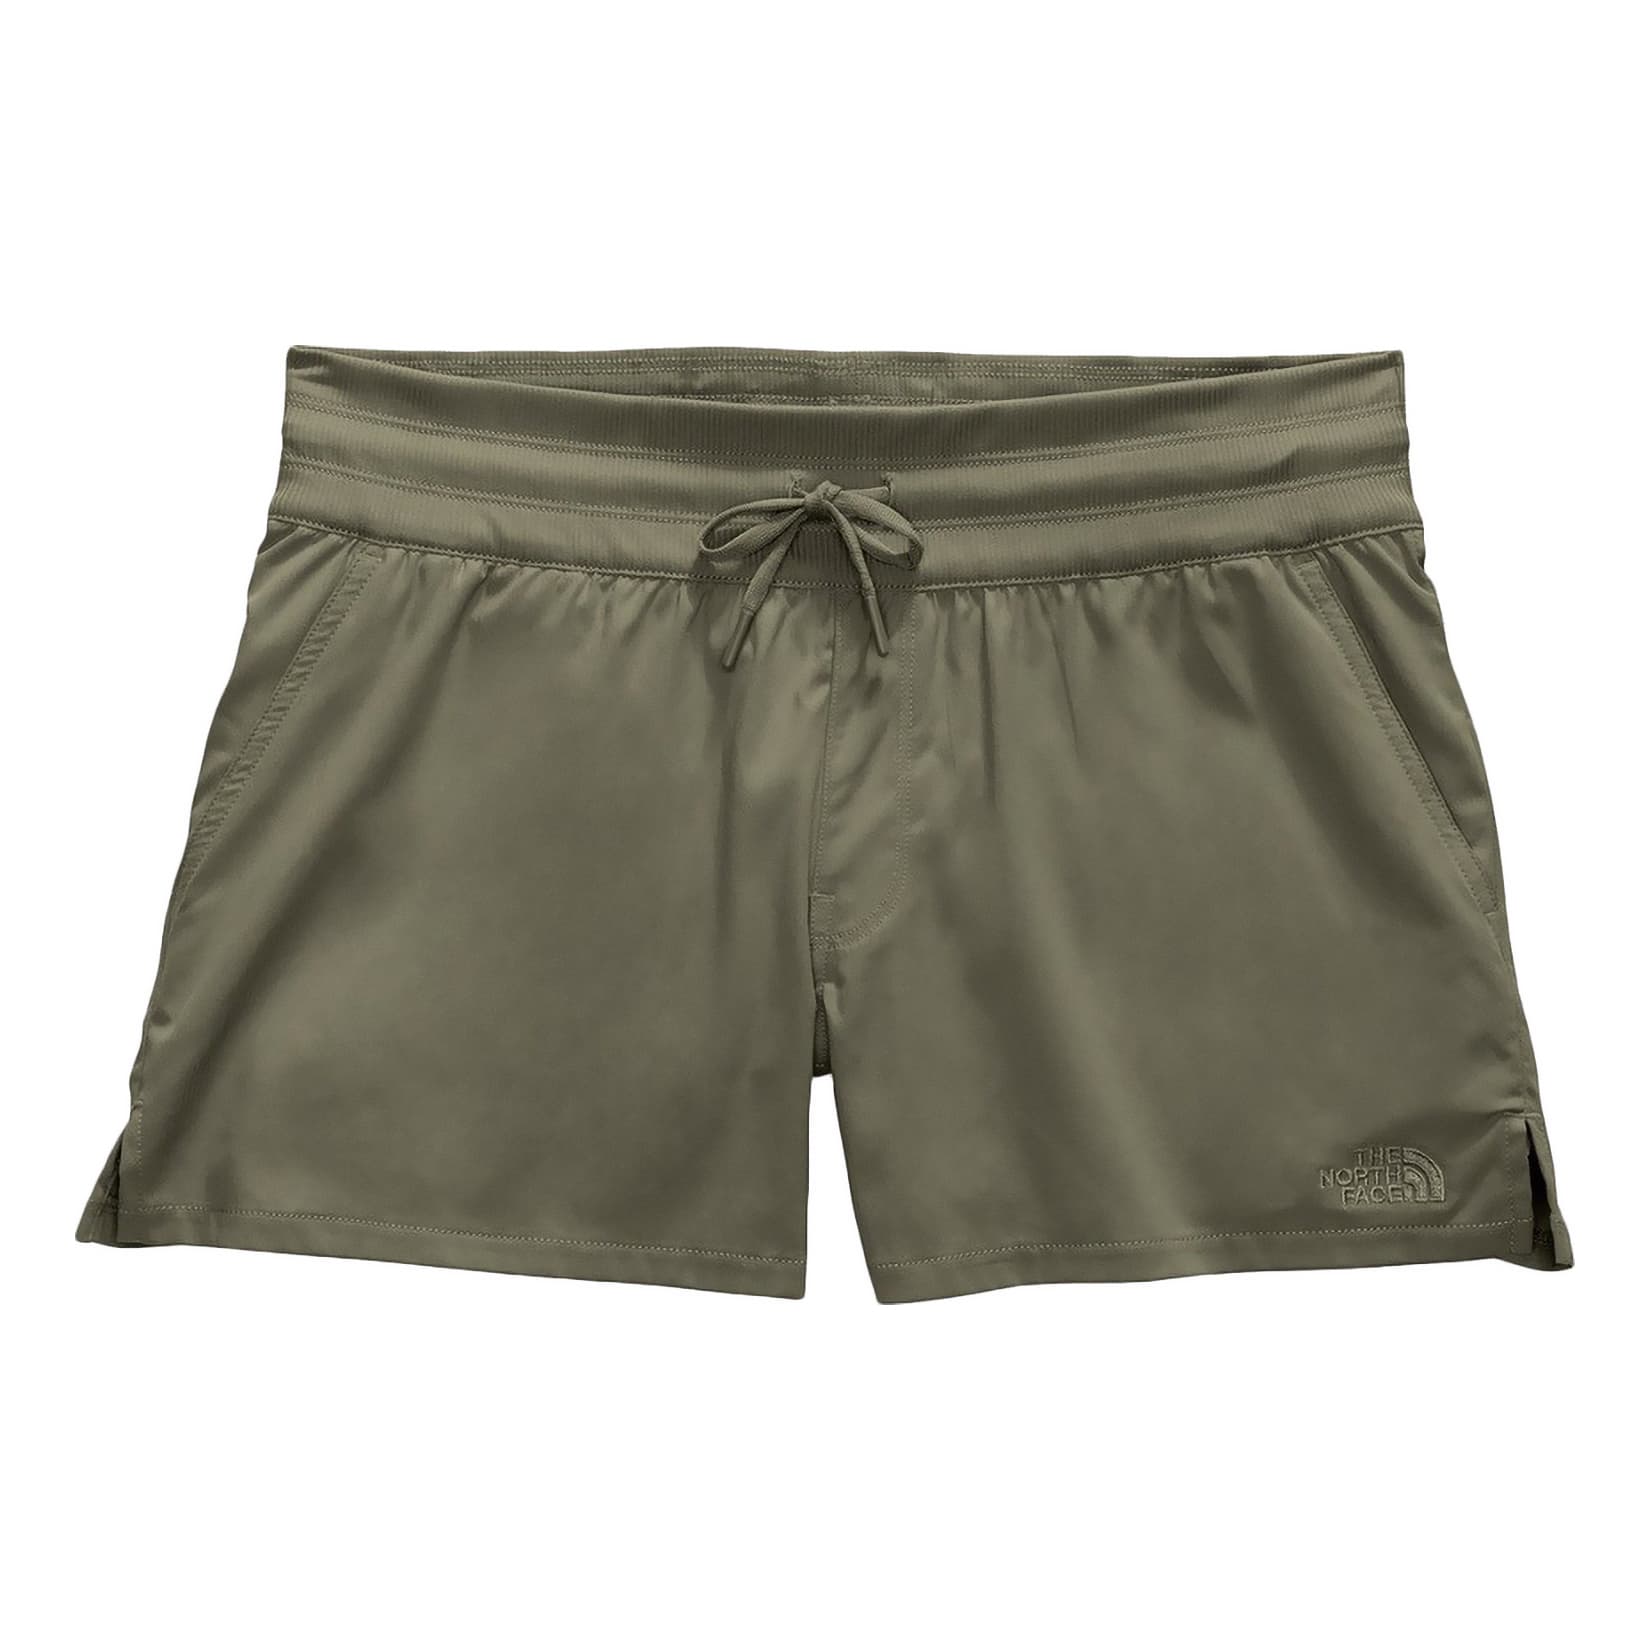 The North Face® Women’s Aphrodite Motion Short - New Taupe Green